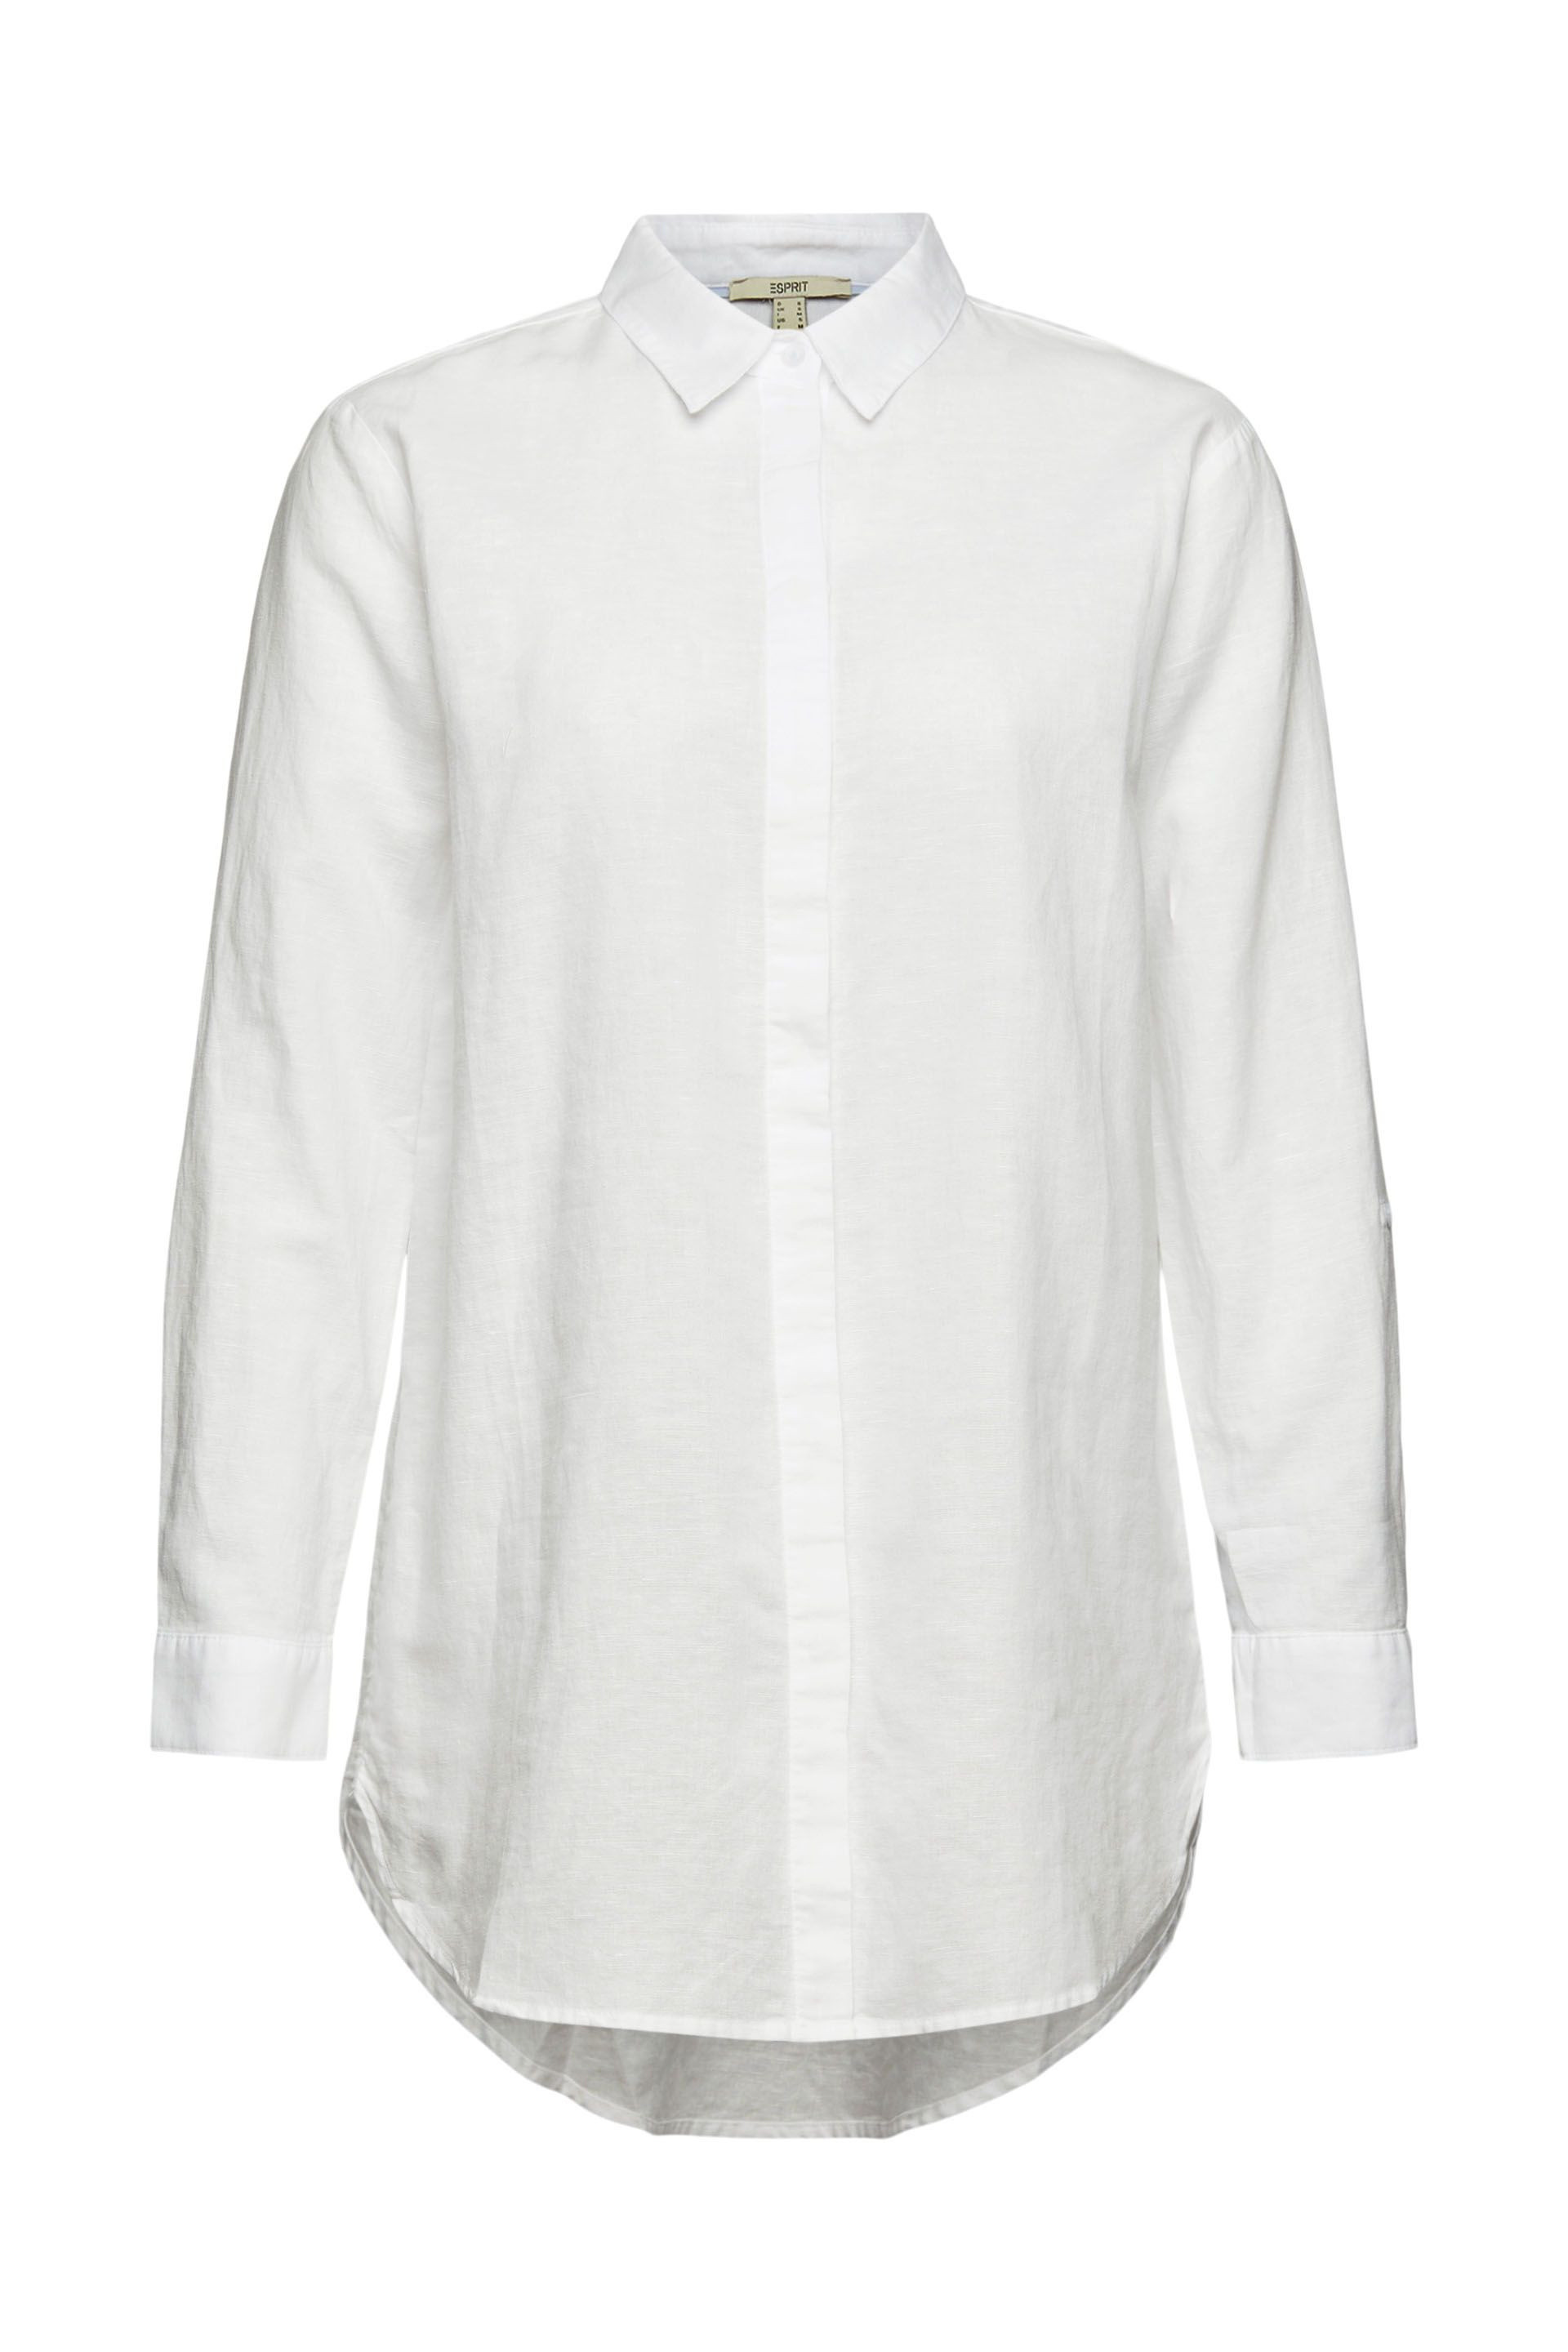 Camicia in misto lino, Bianco, large image number 0